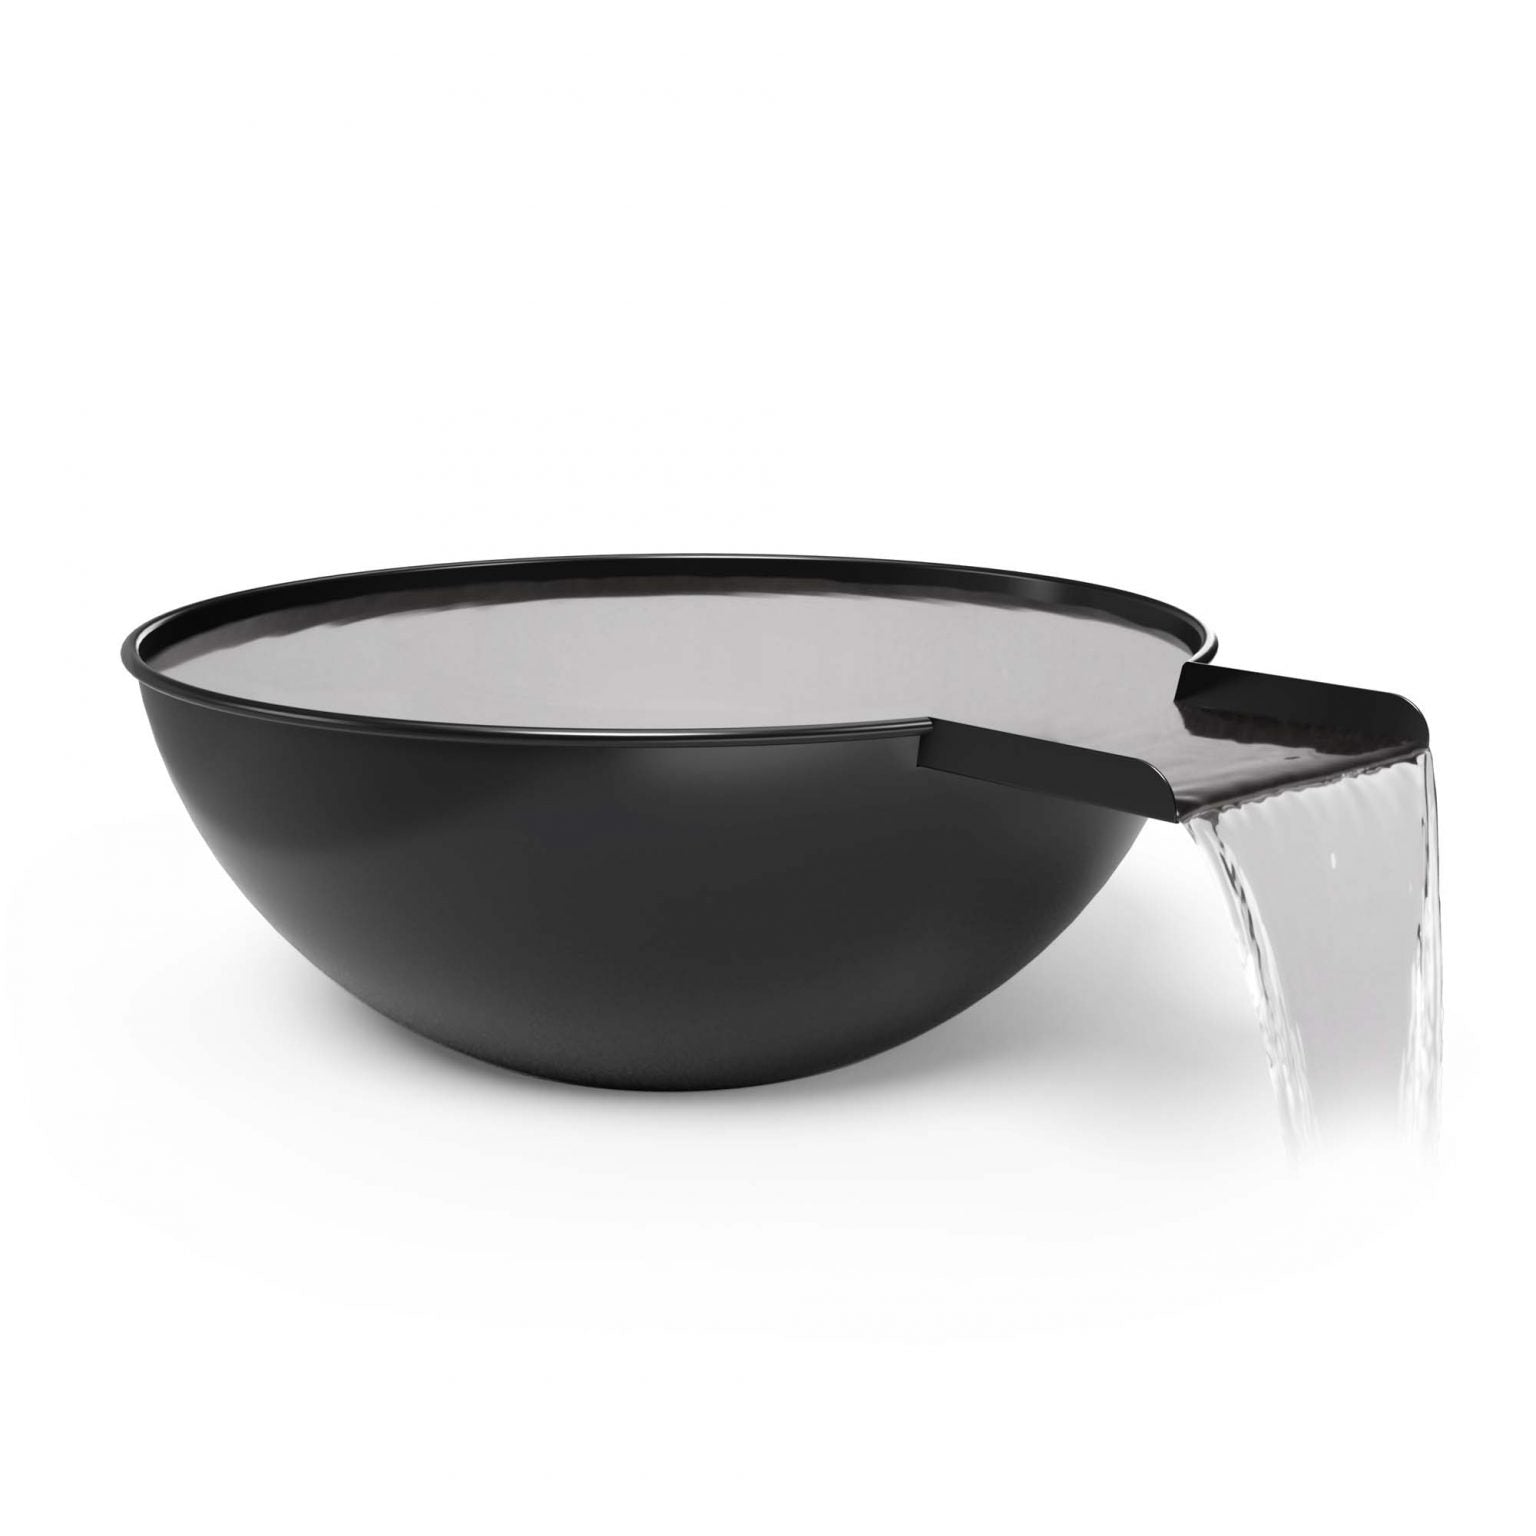 The Outdoor Plus Water Bowl The Outdoor Plus Sedona 27" Water Bowl | Metal Powder Coated OPT-27RPCWO